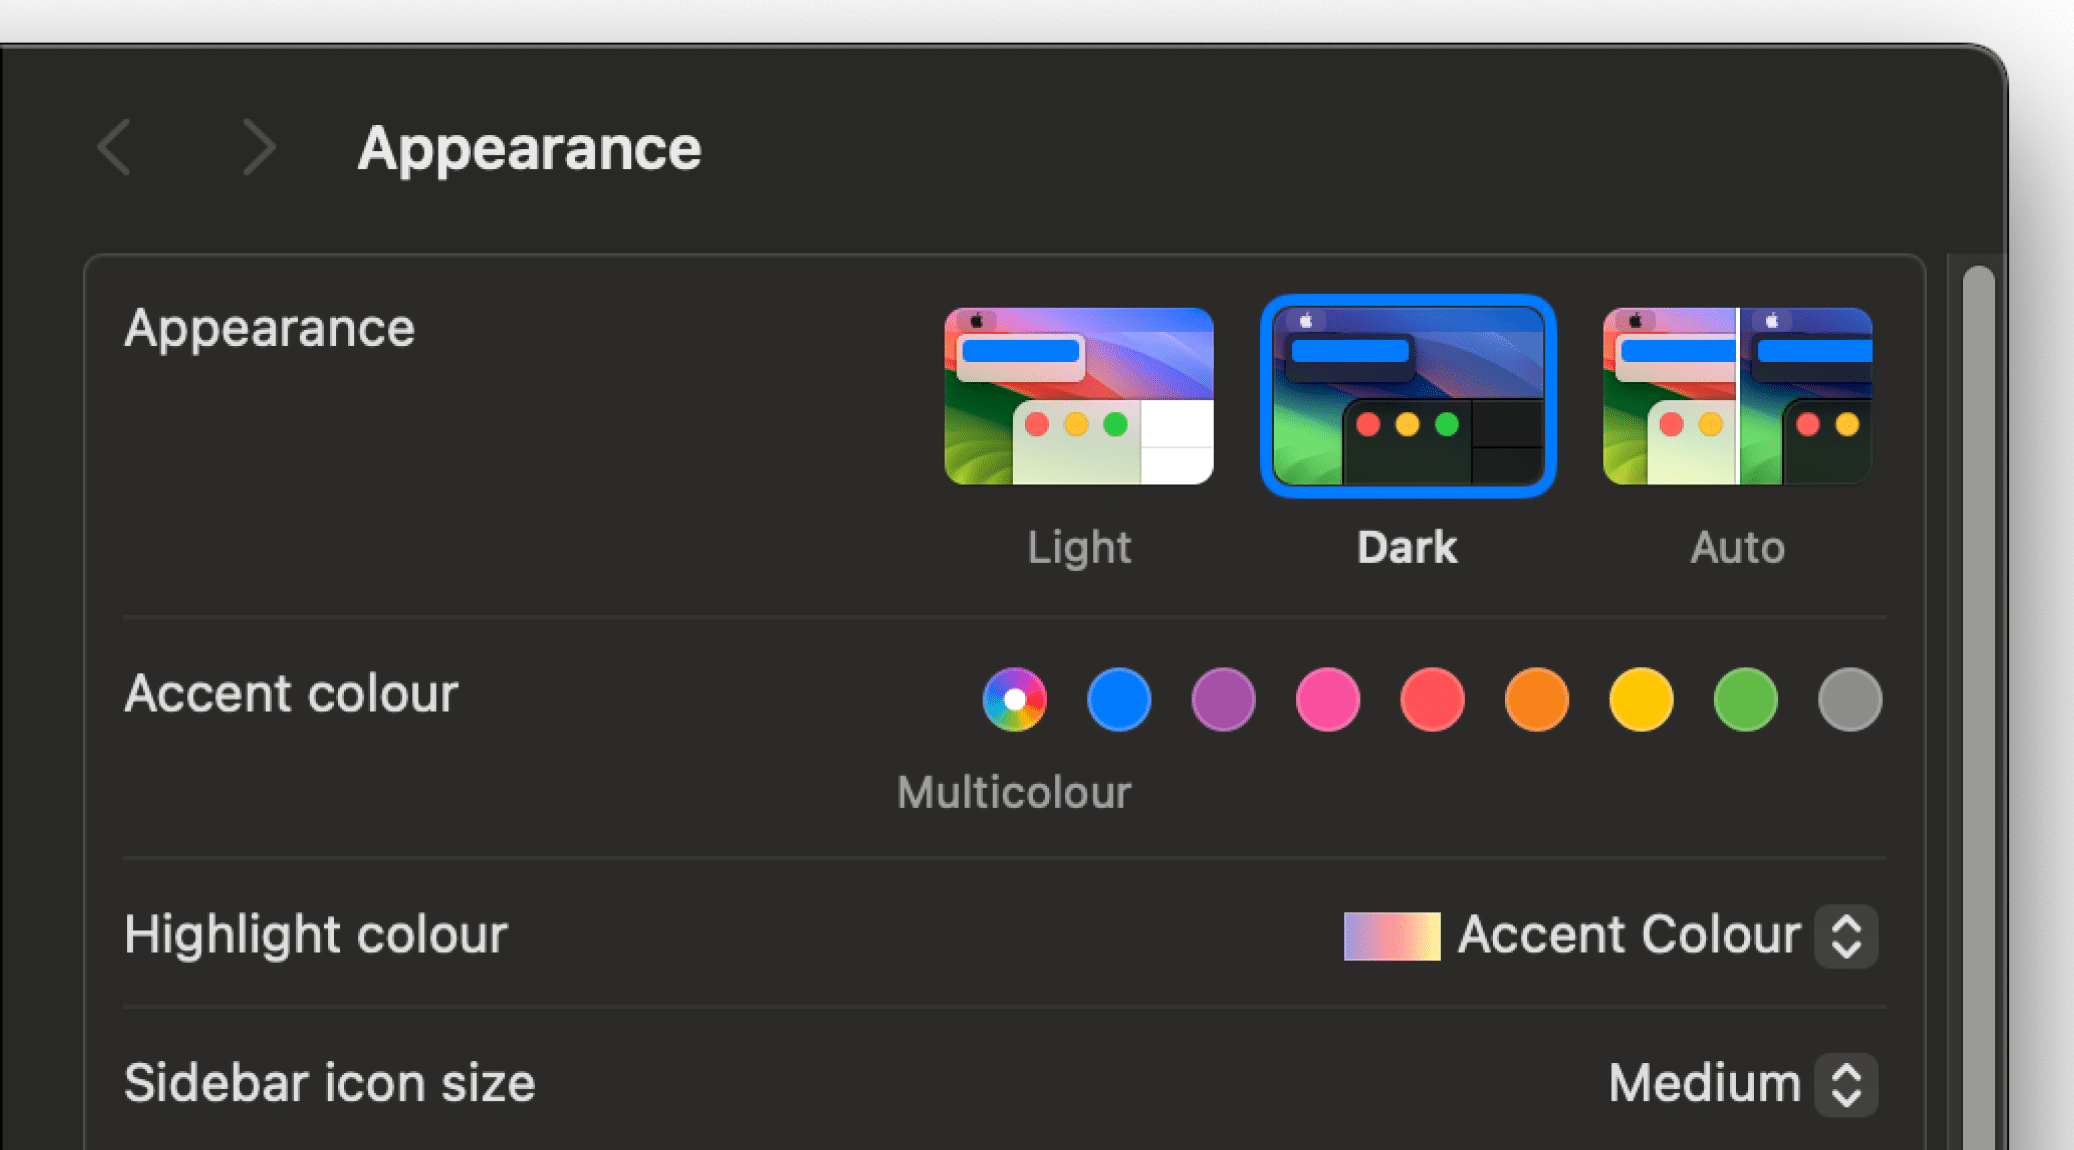 The Appearance settings of MacOS